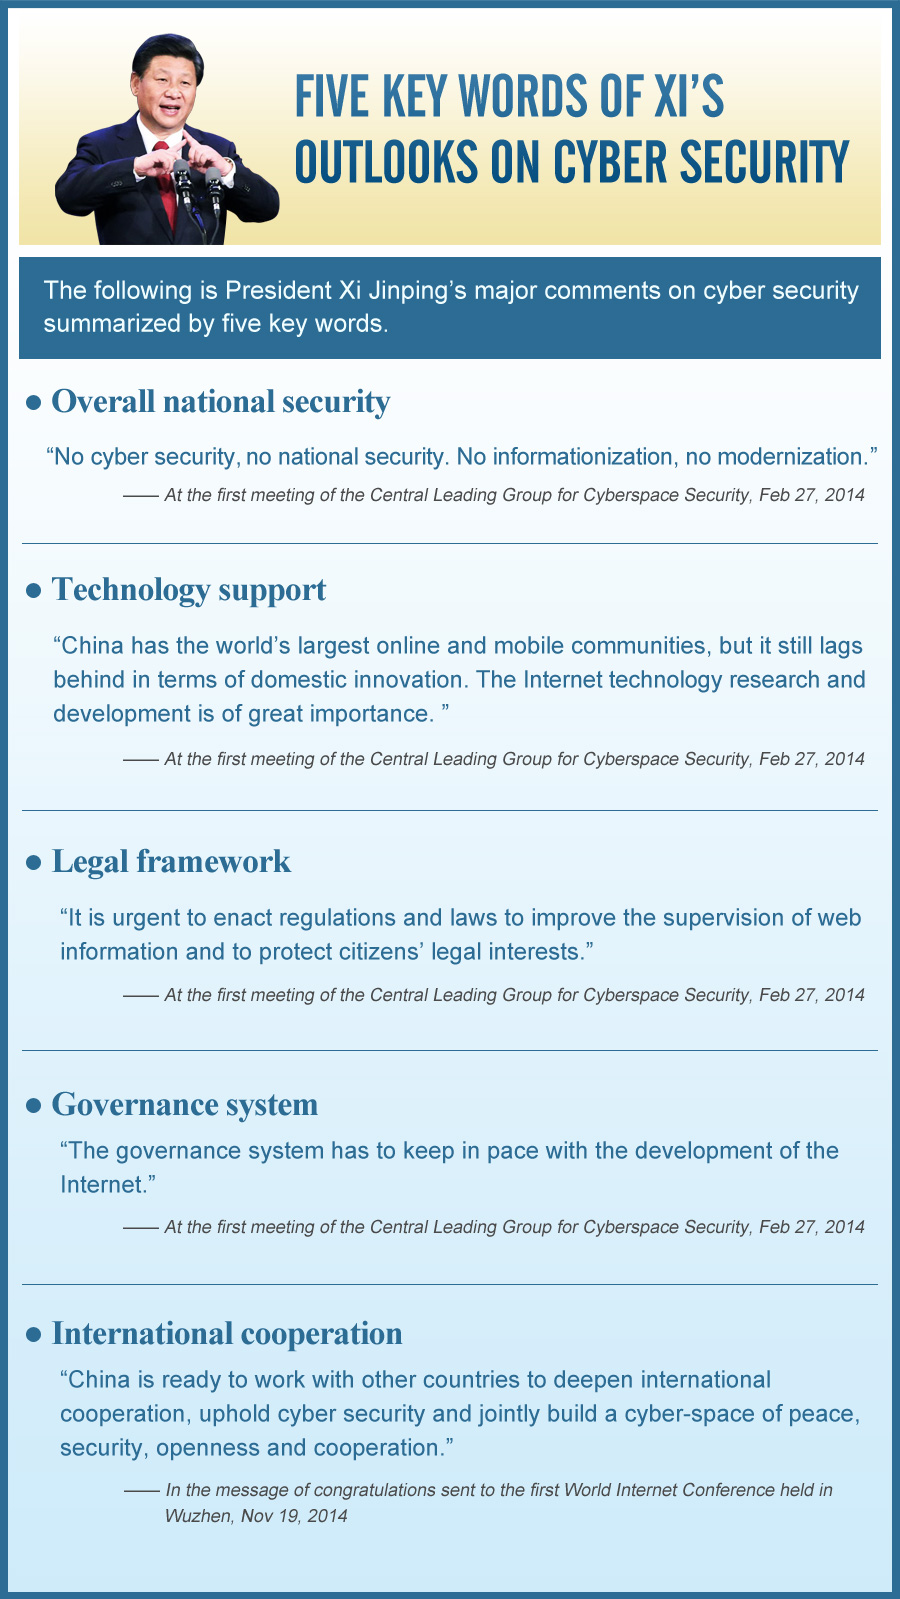 Five key words of Xi's outlooks on cyber security